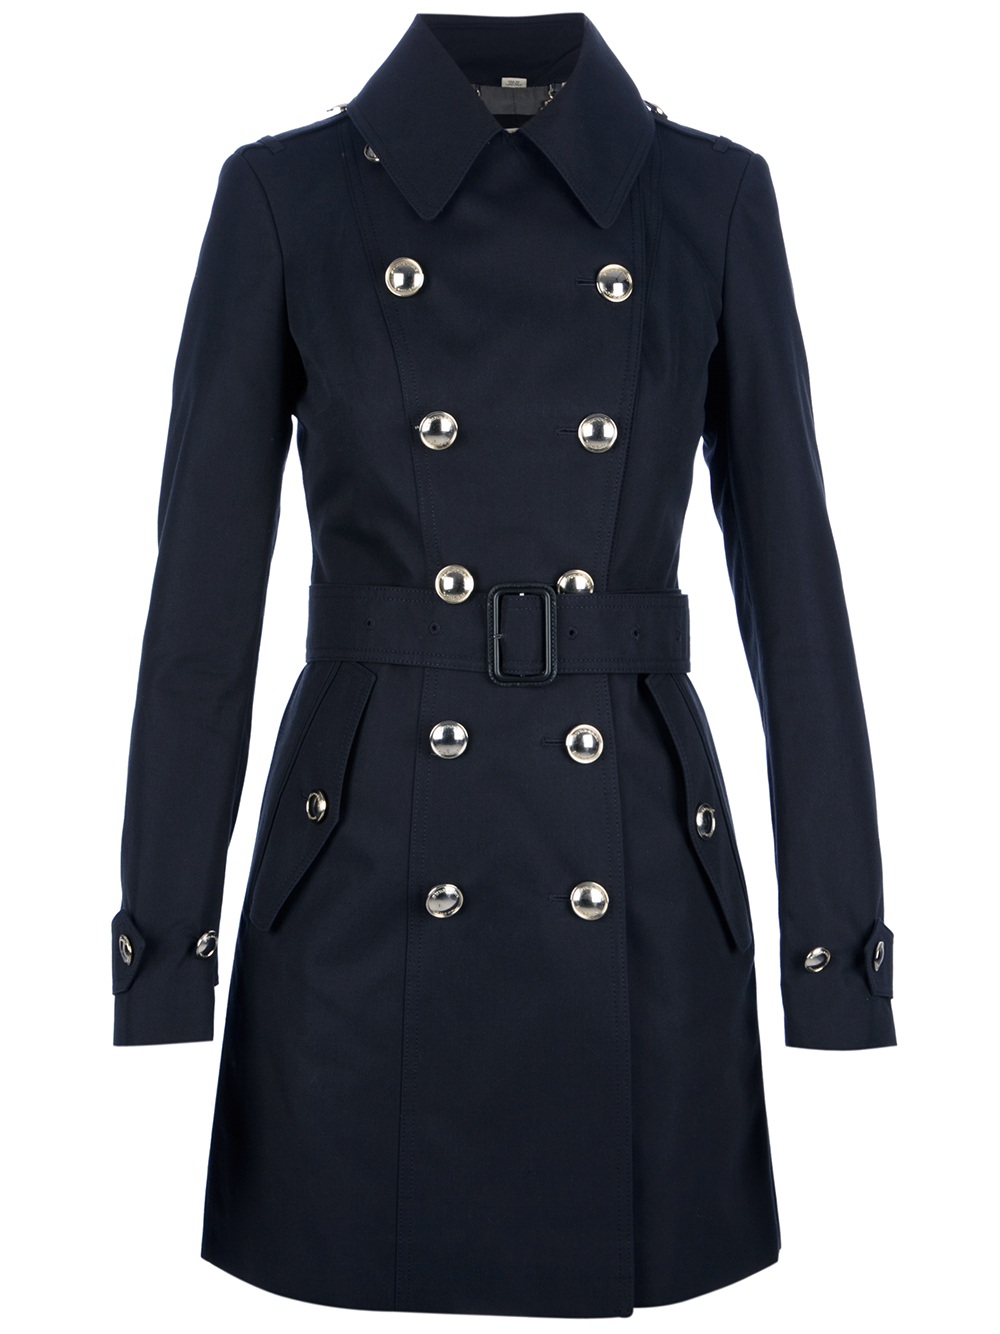 Burberry Double Breasted Trench Coat in Blue - Lyst